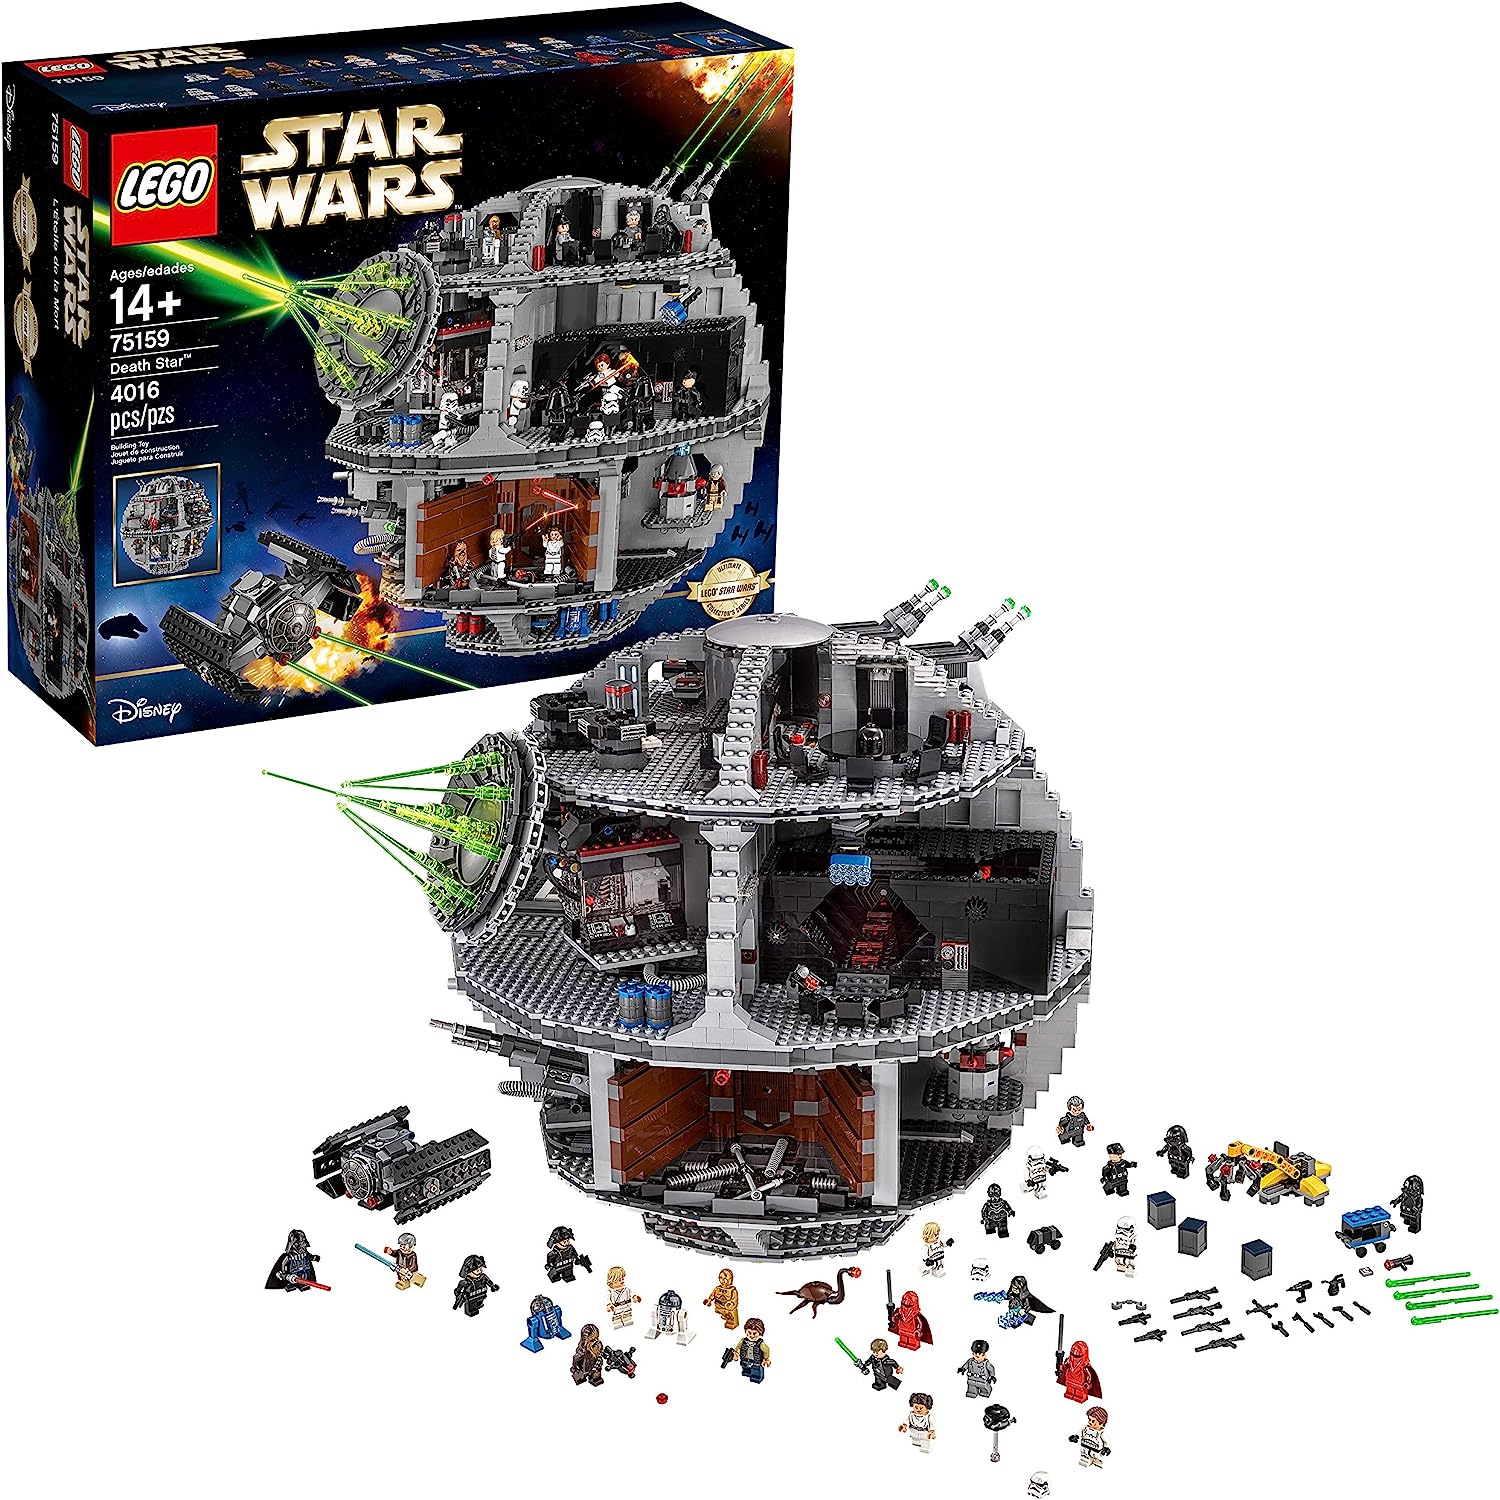 LEGO Star Wars Death Star - Space Station Building Kit with Star Wars Minifigures